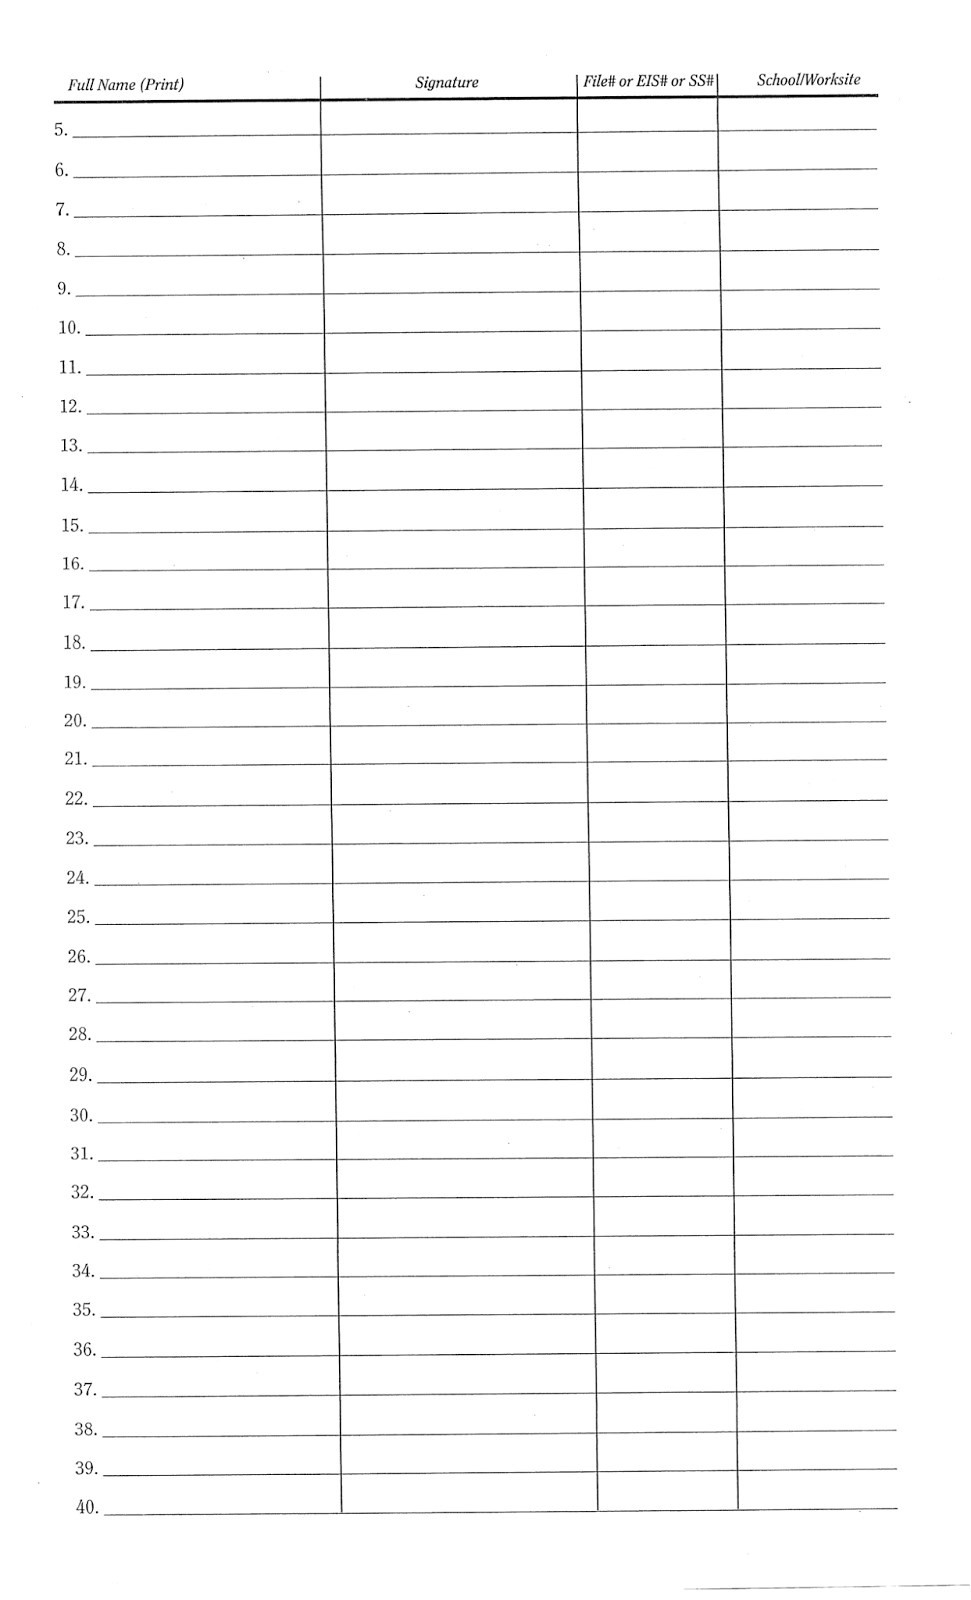 petition sign up sheet template